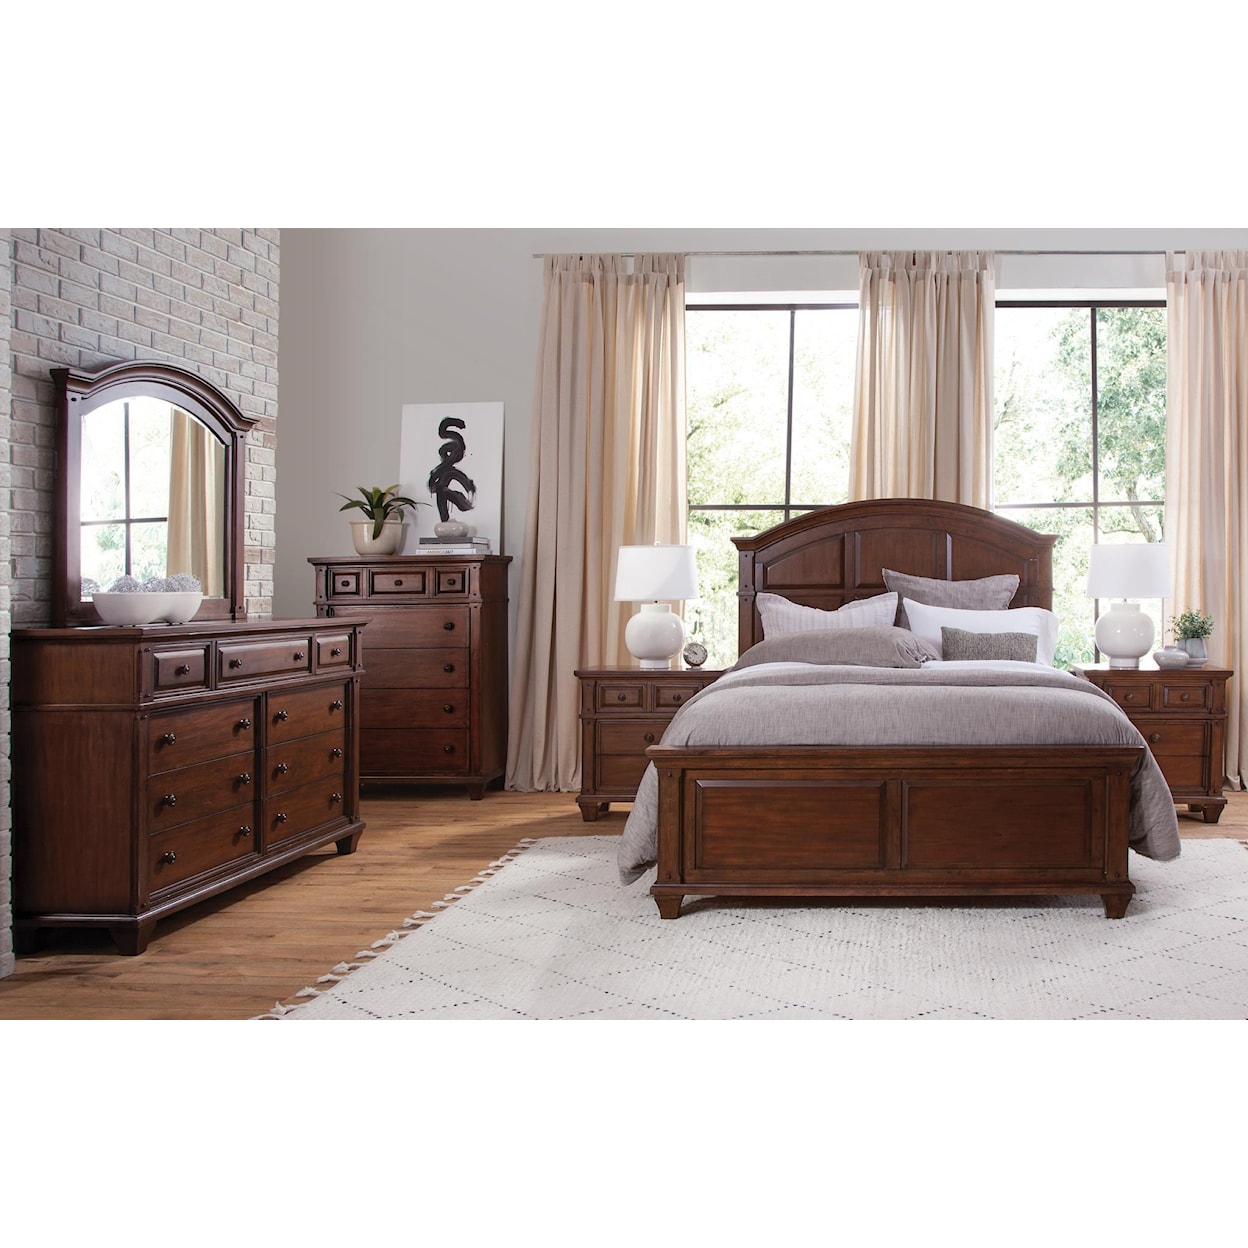 American Woodcrafters 2400 King Sedona Bed